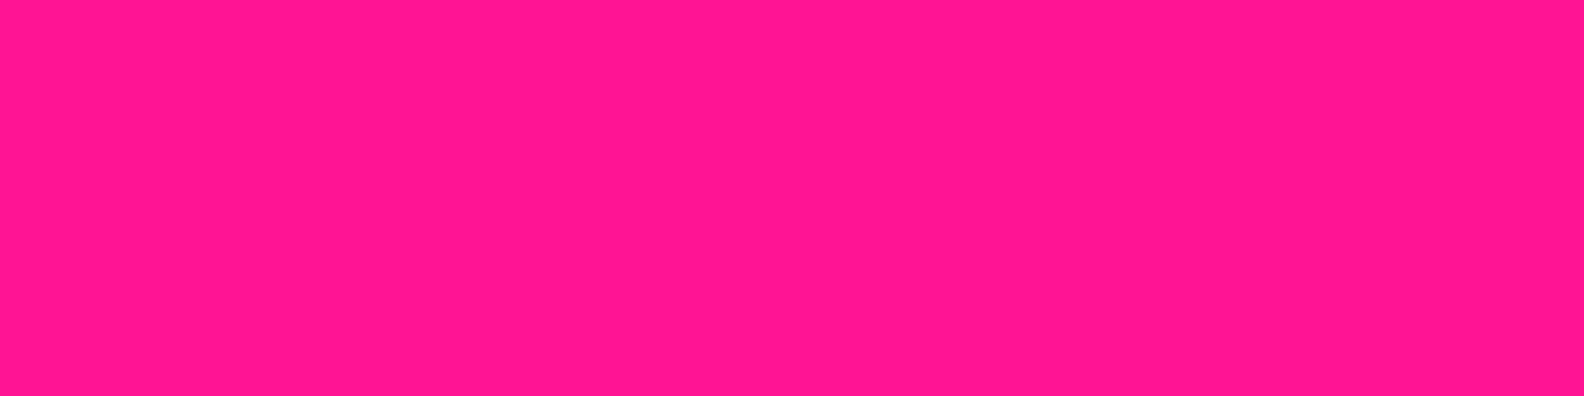 1584x396 Deep Pink Solid Color Background